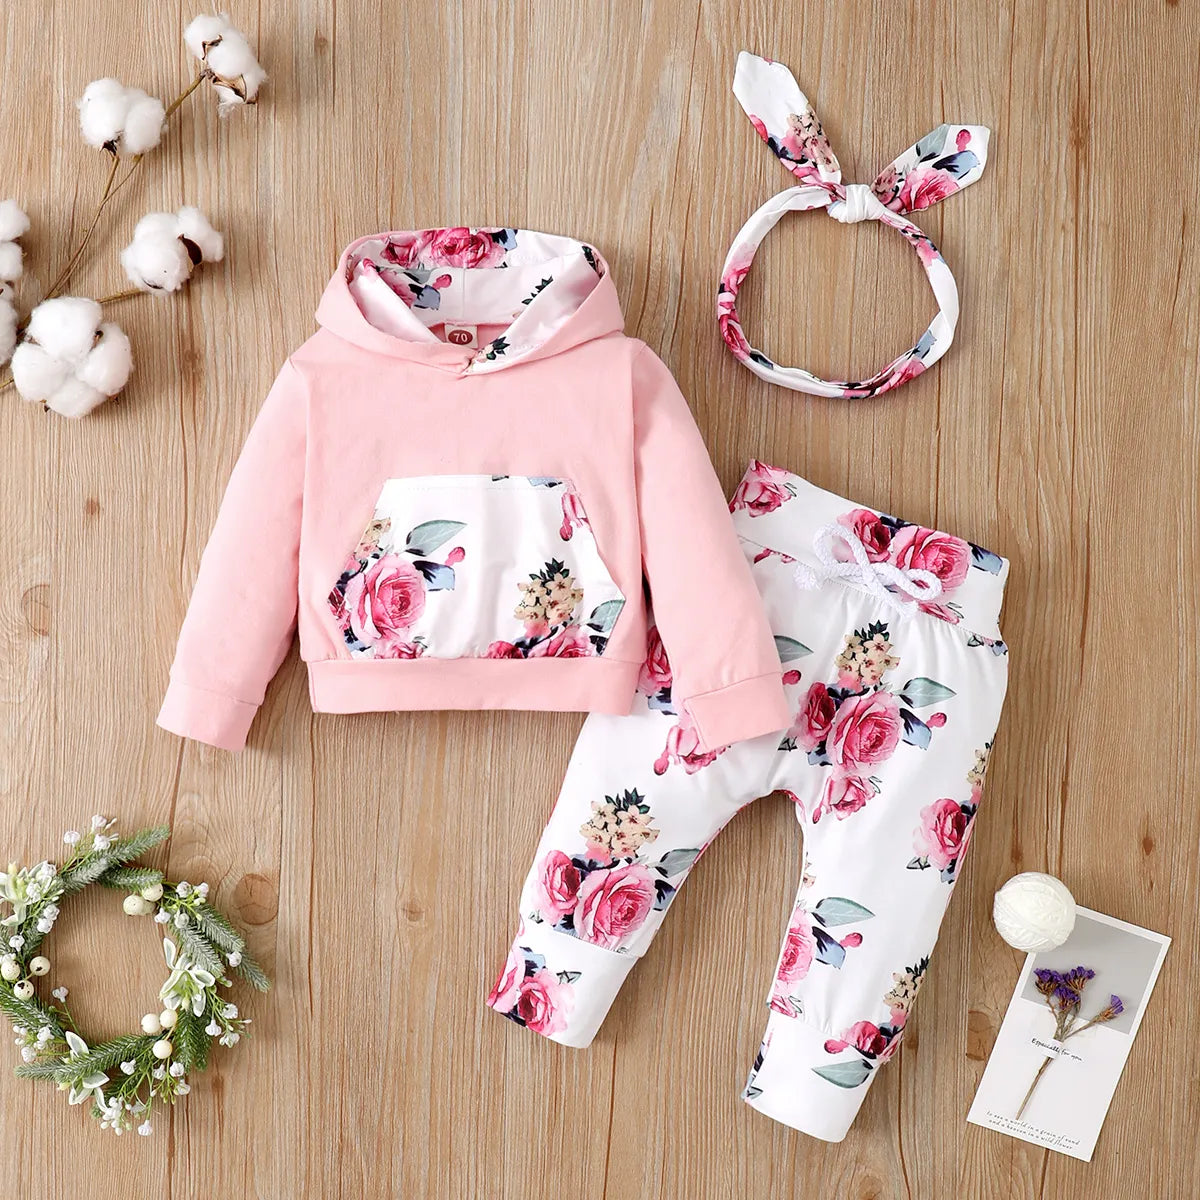 Floral Baby Set With Bow